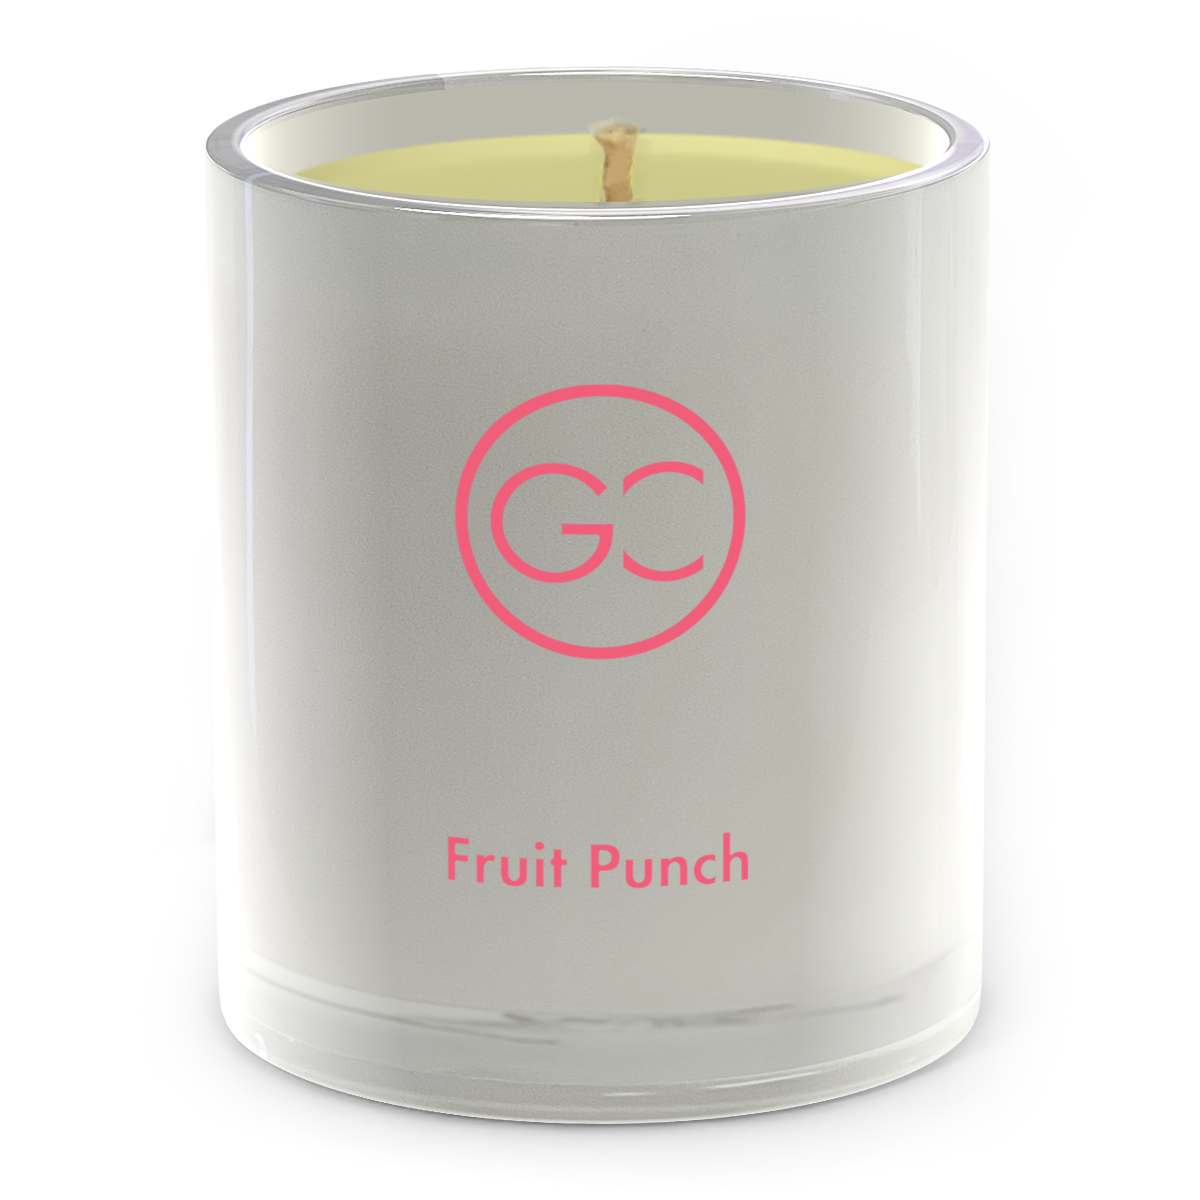 Fruit Punch Scented Soy Candle 55hr Burn